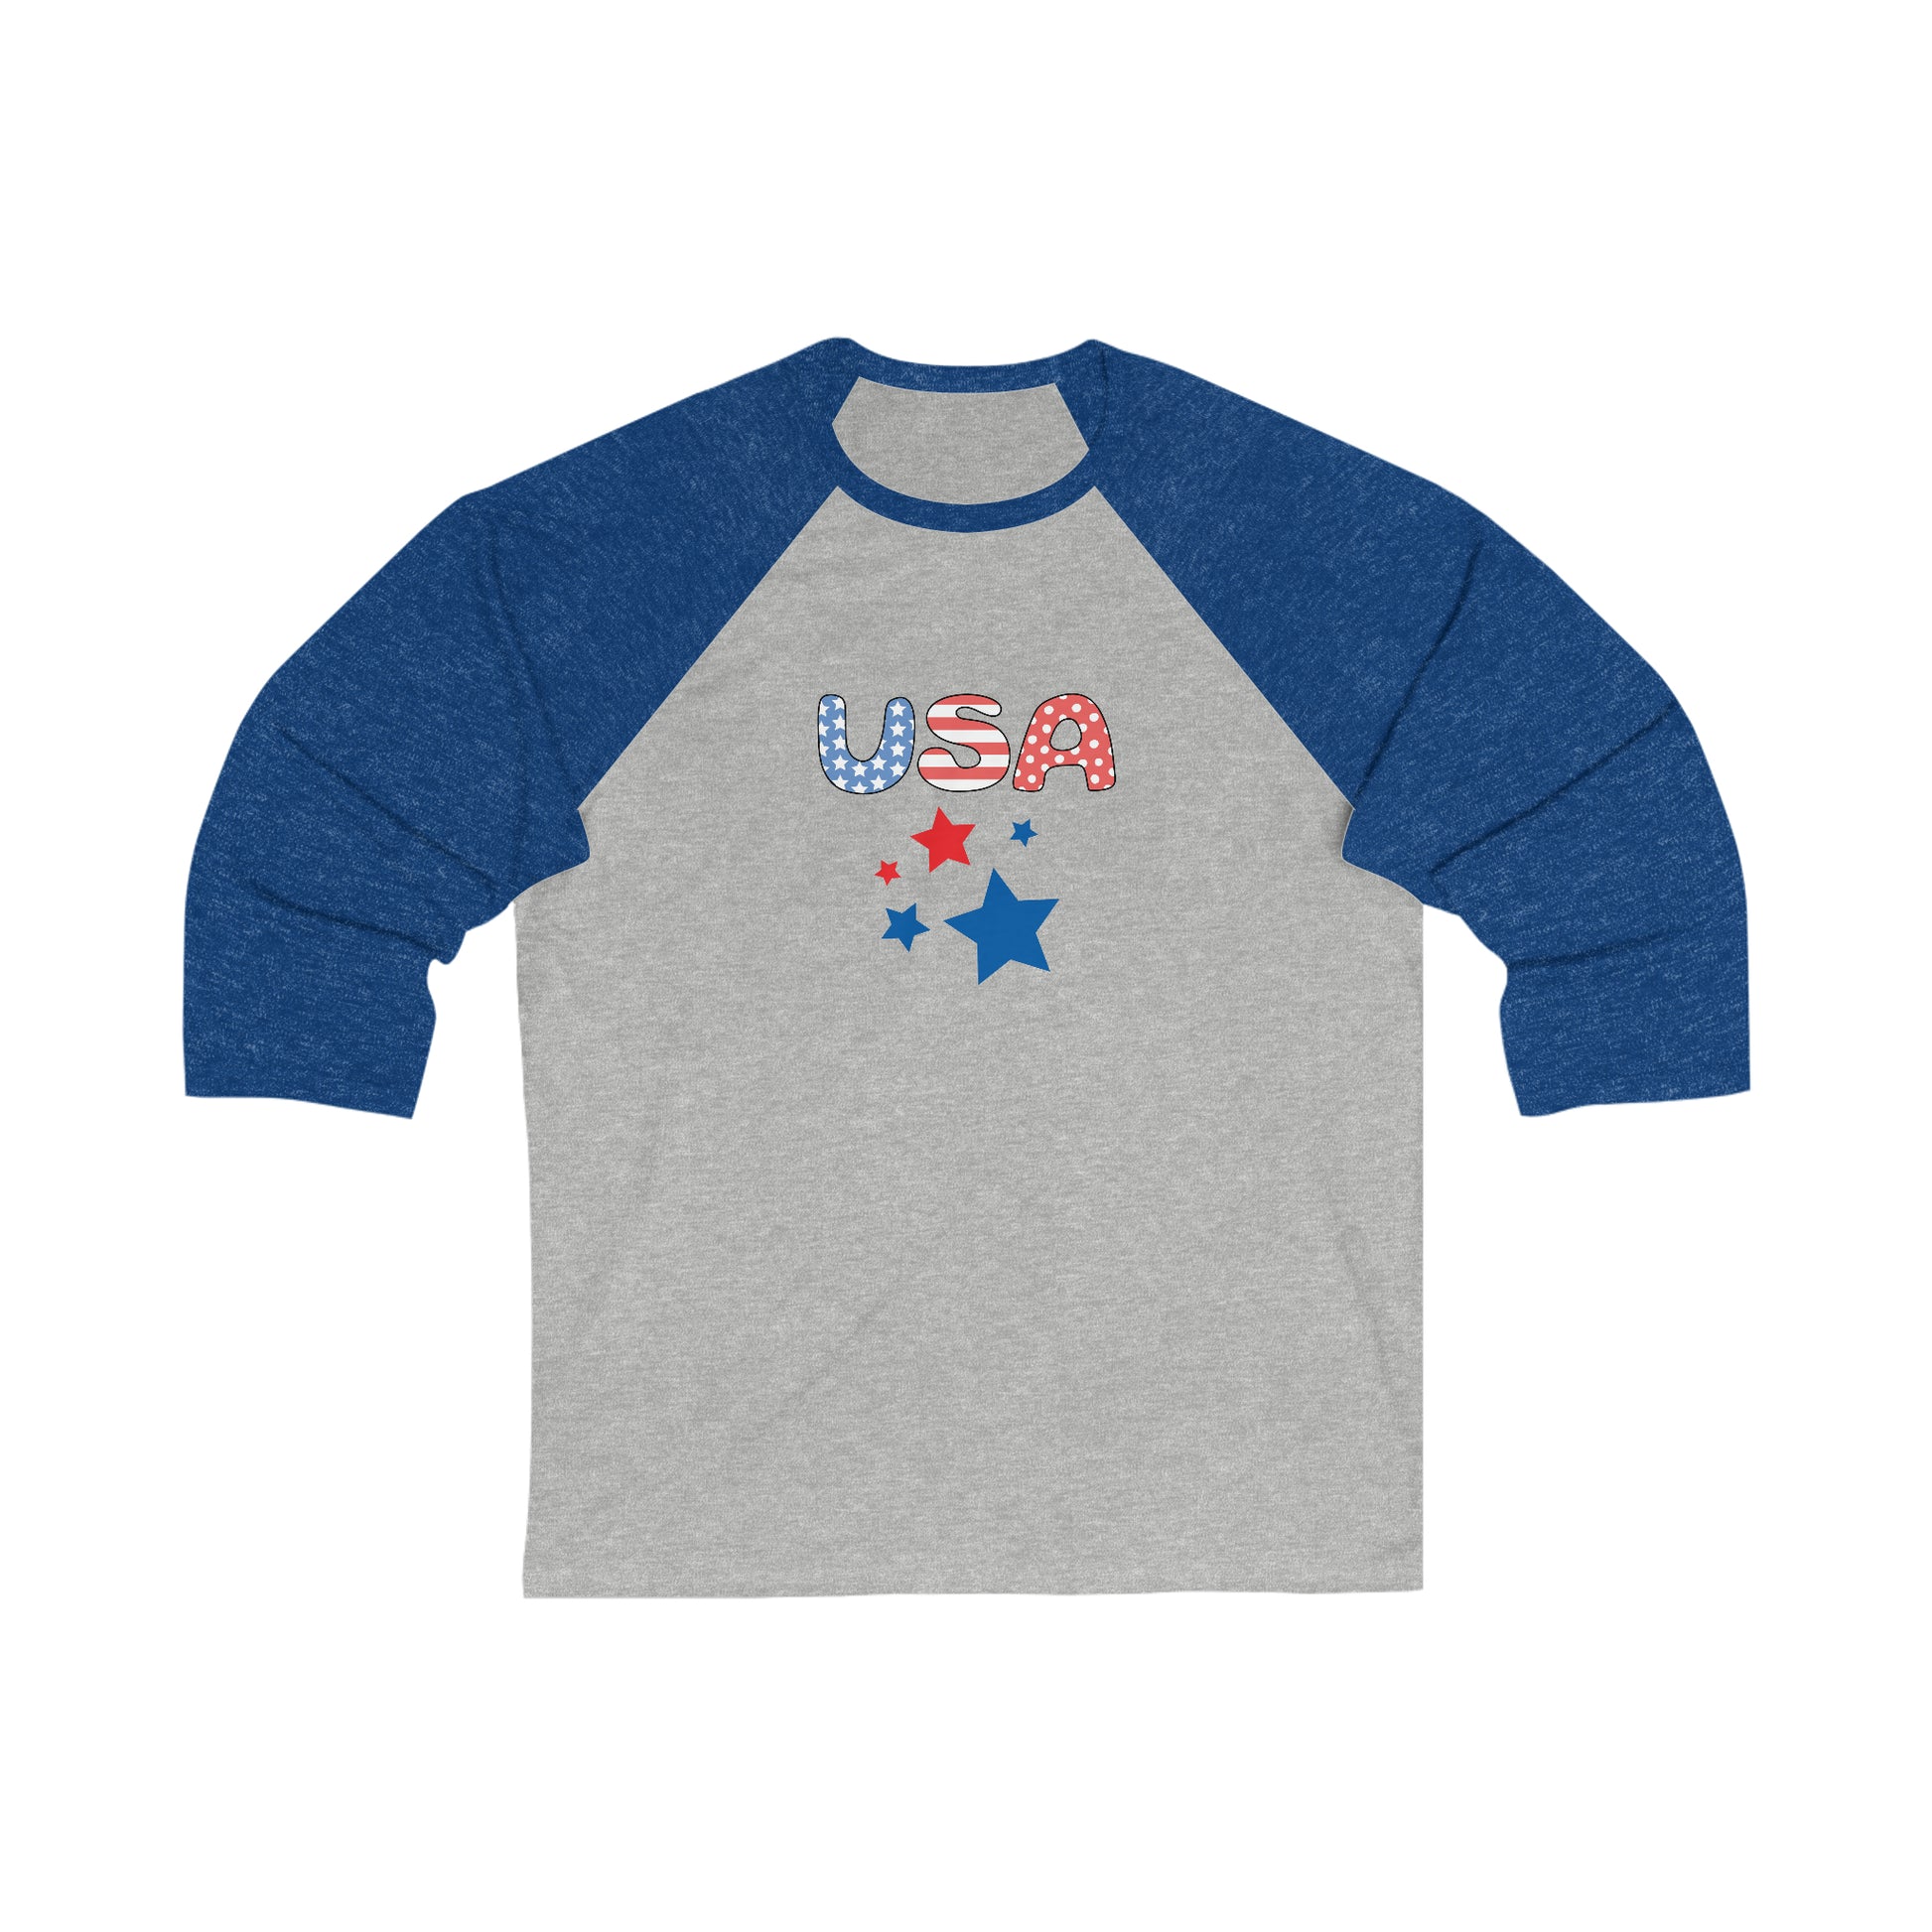 Flat front view of the True Royal shirt